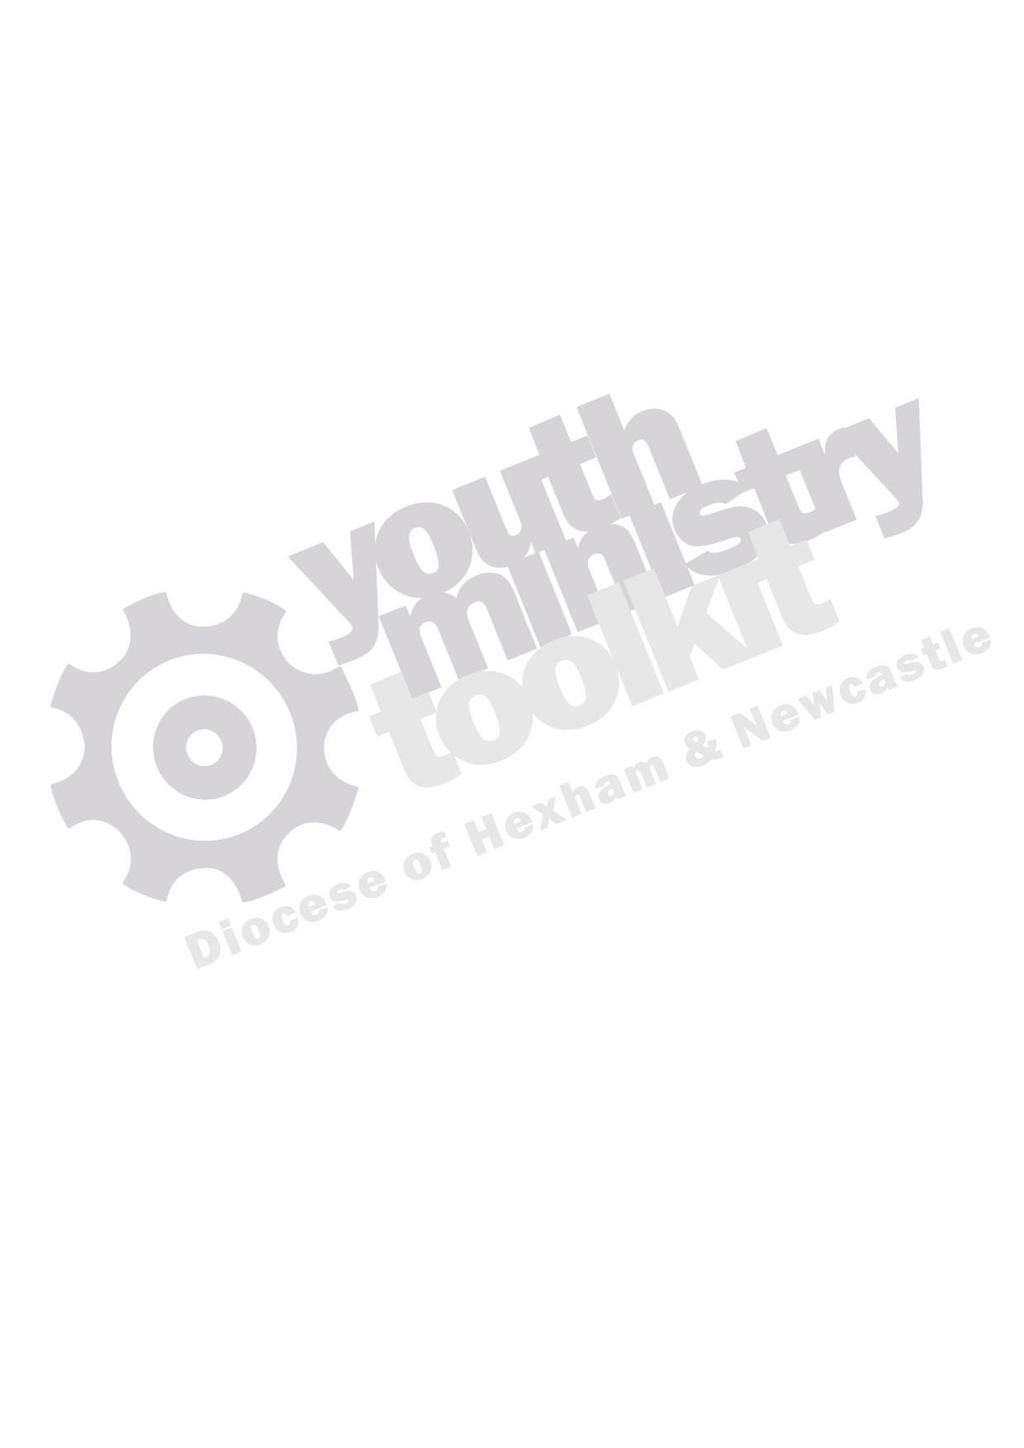 Guidelines for employing a Youth Ministry Coordinator FOREWORD As the Church of Hexham and Newcastle, we are challenged to listen to and live out the Gospel and to build the Kingdom of God in our